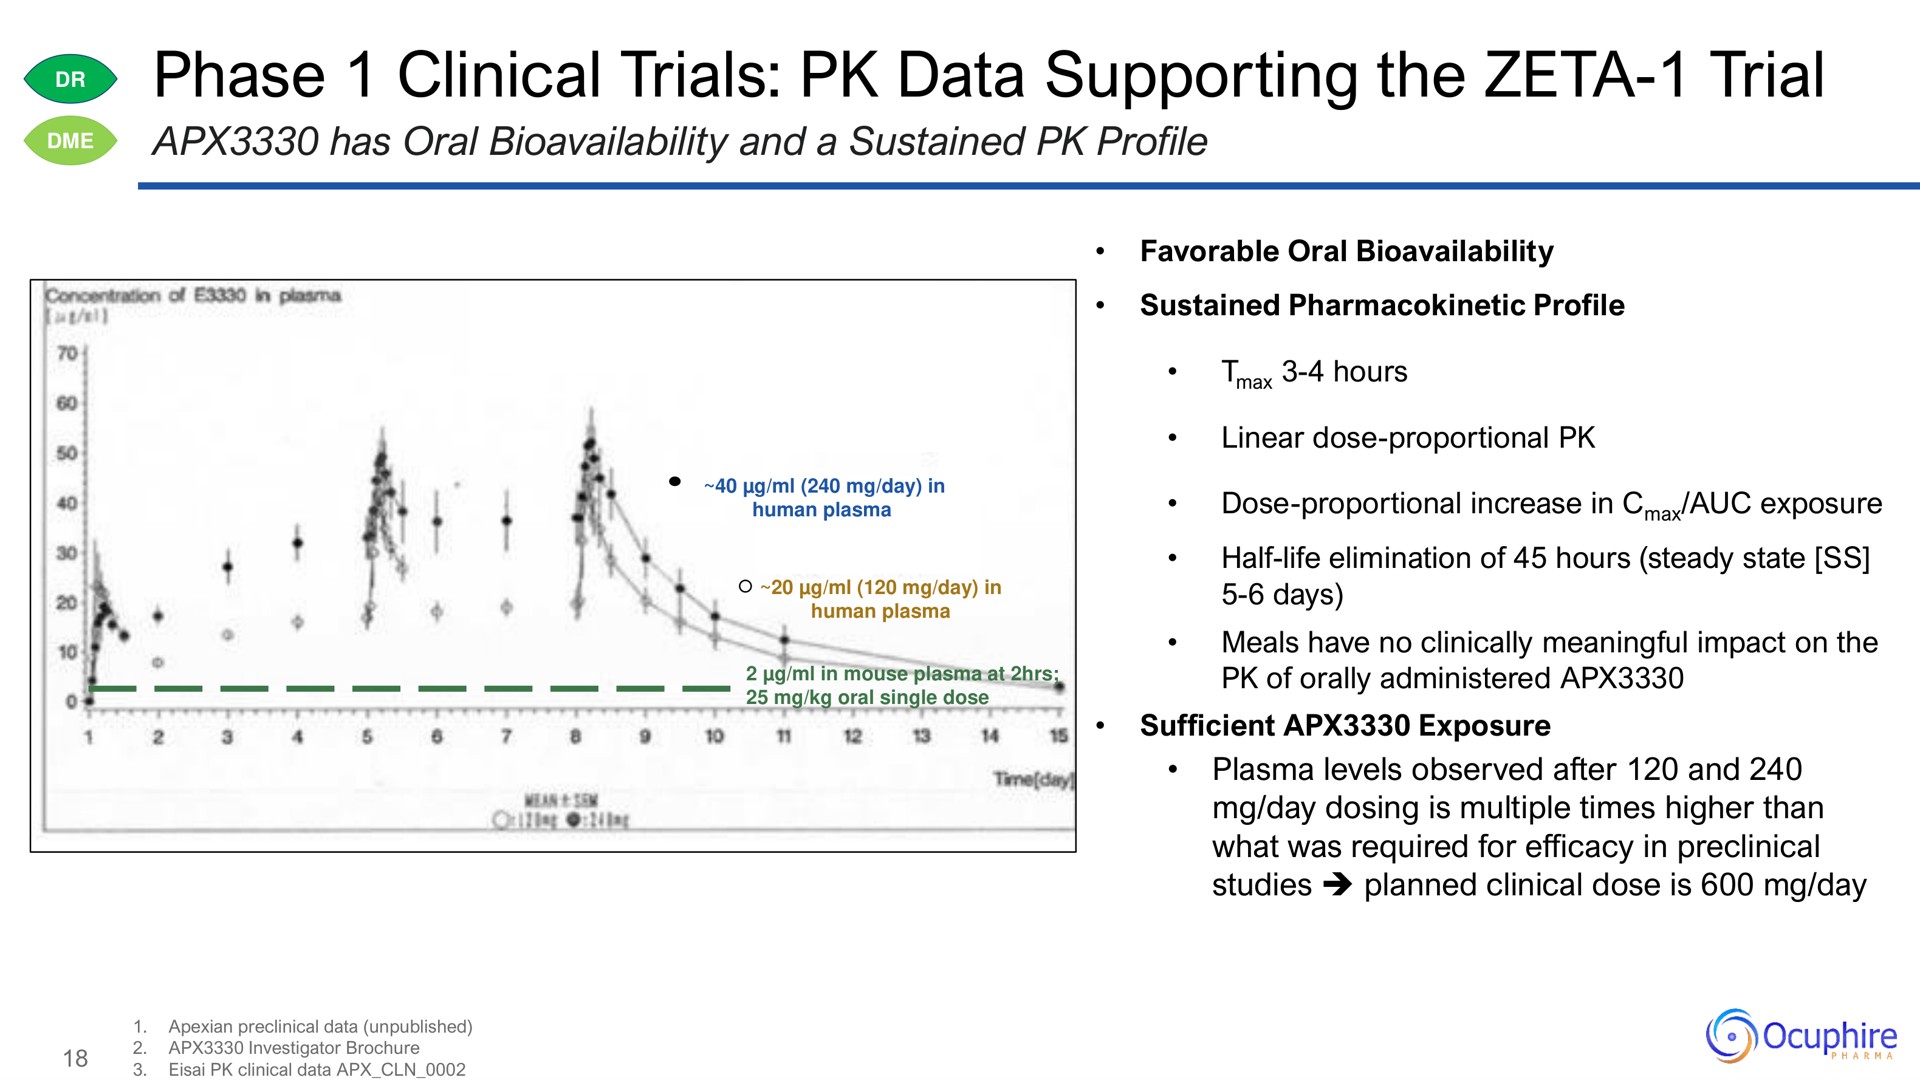 phase clinical trials data supporting the zeta trial | Ocuphire Pharma